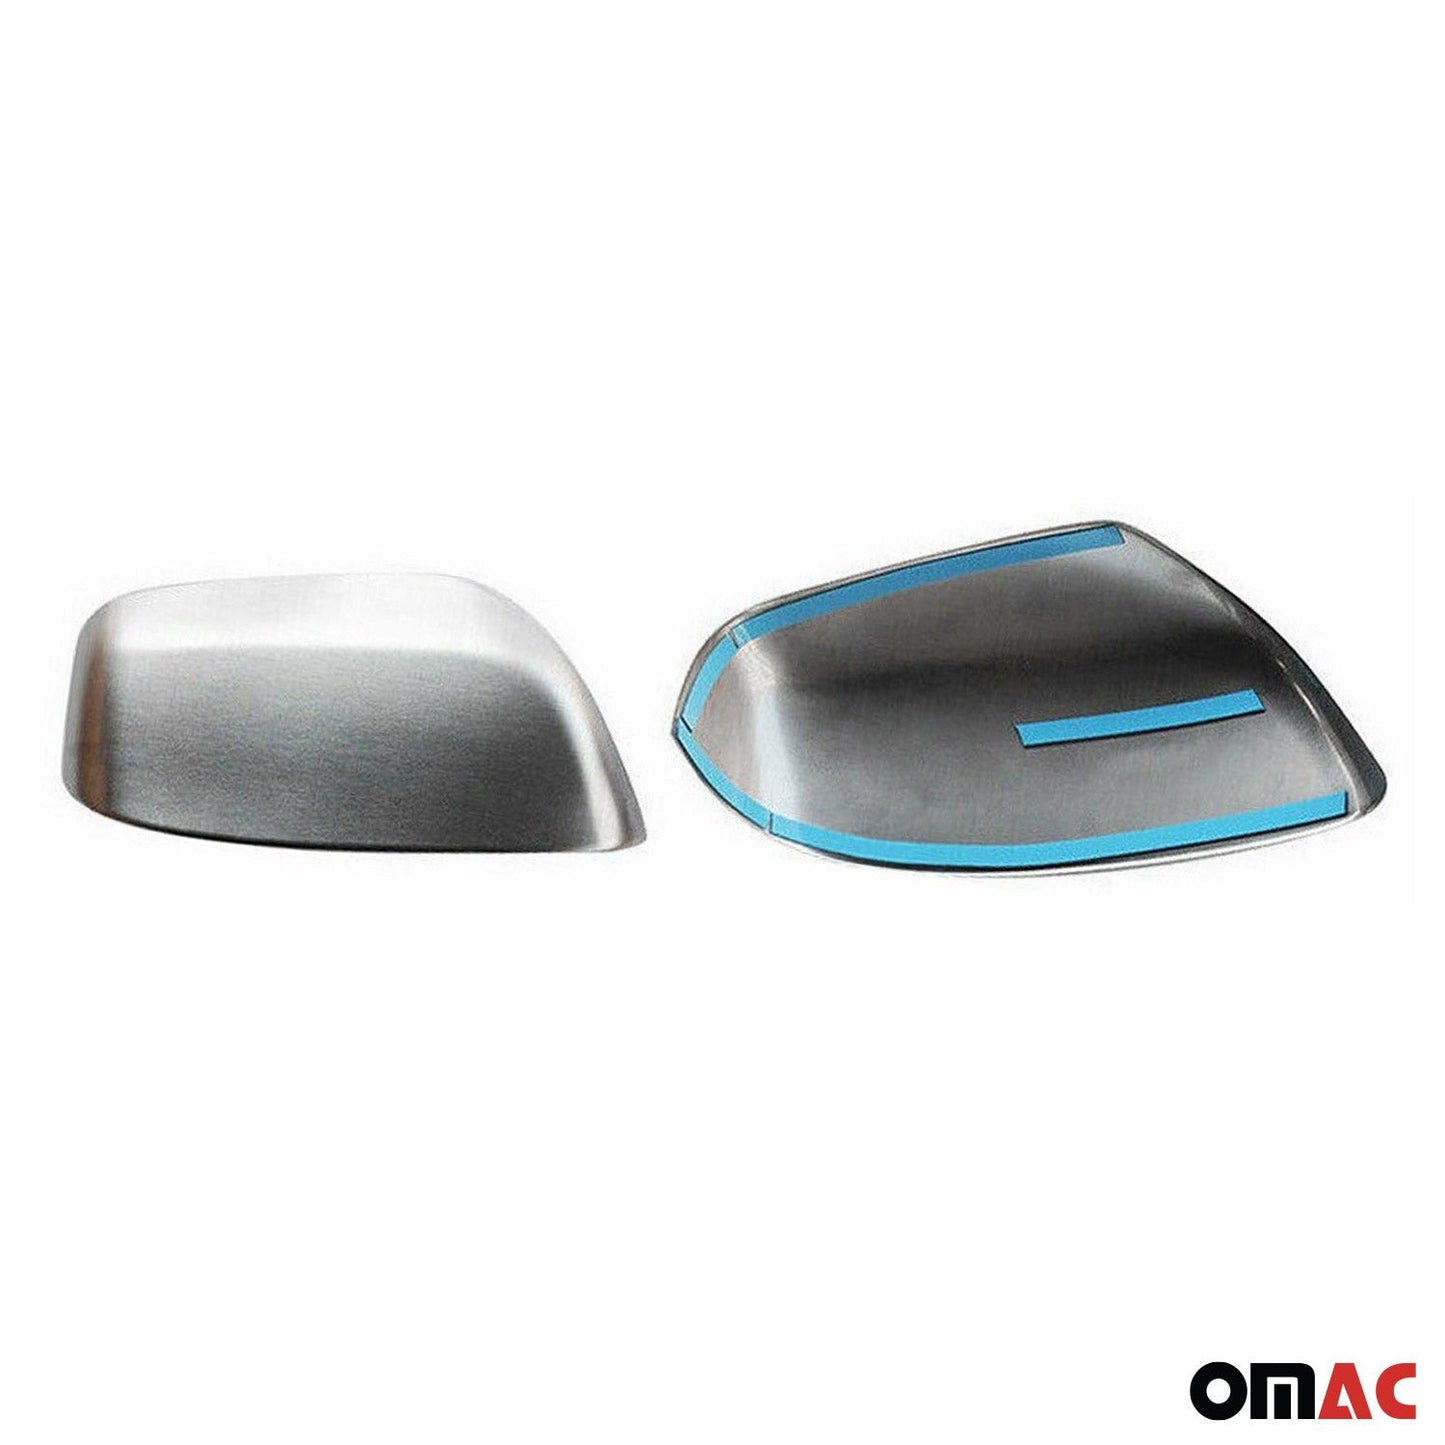 OMAC Side Mirror Cover Caps Fits Lexus GX 460 2010-2013 Brushed Steel Silver 2 Pcs 7013111T